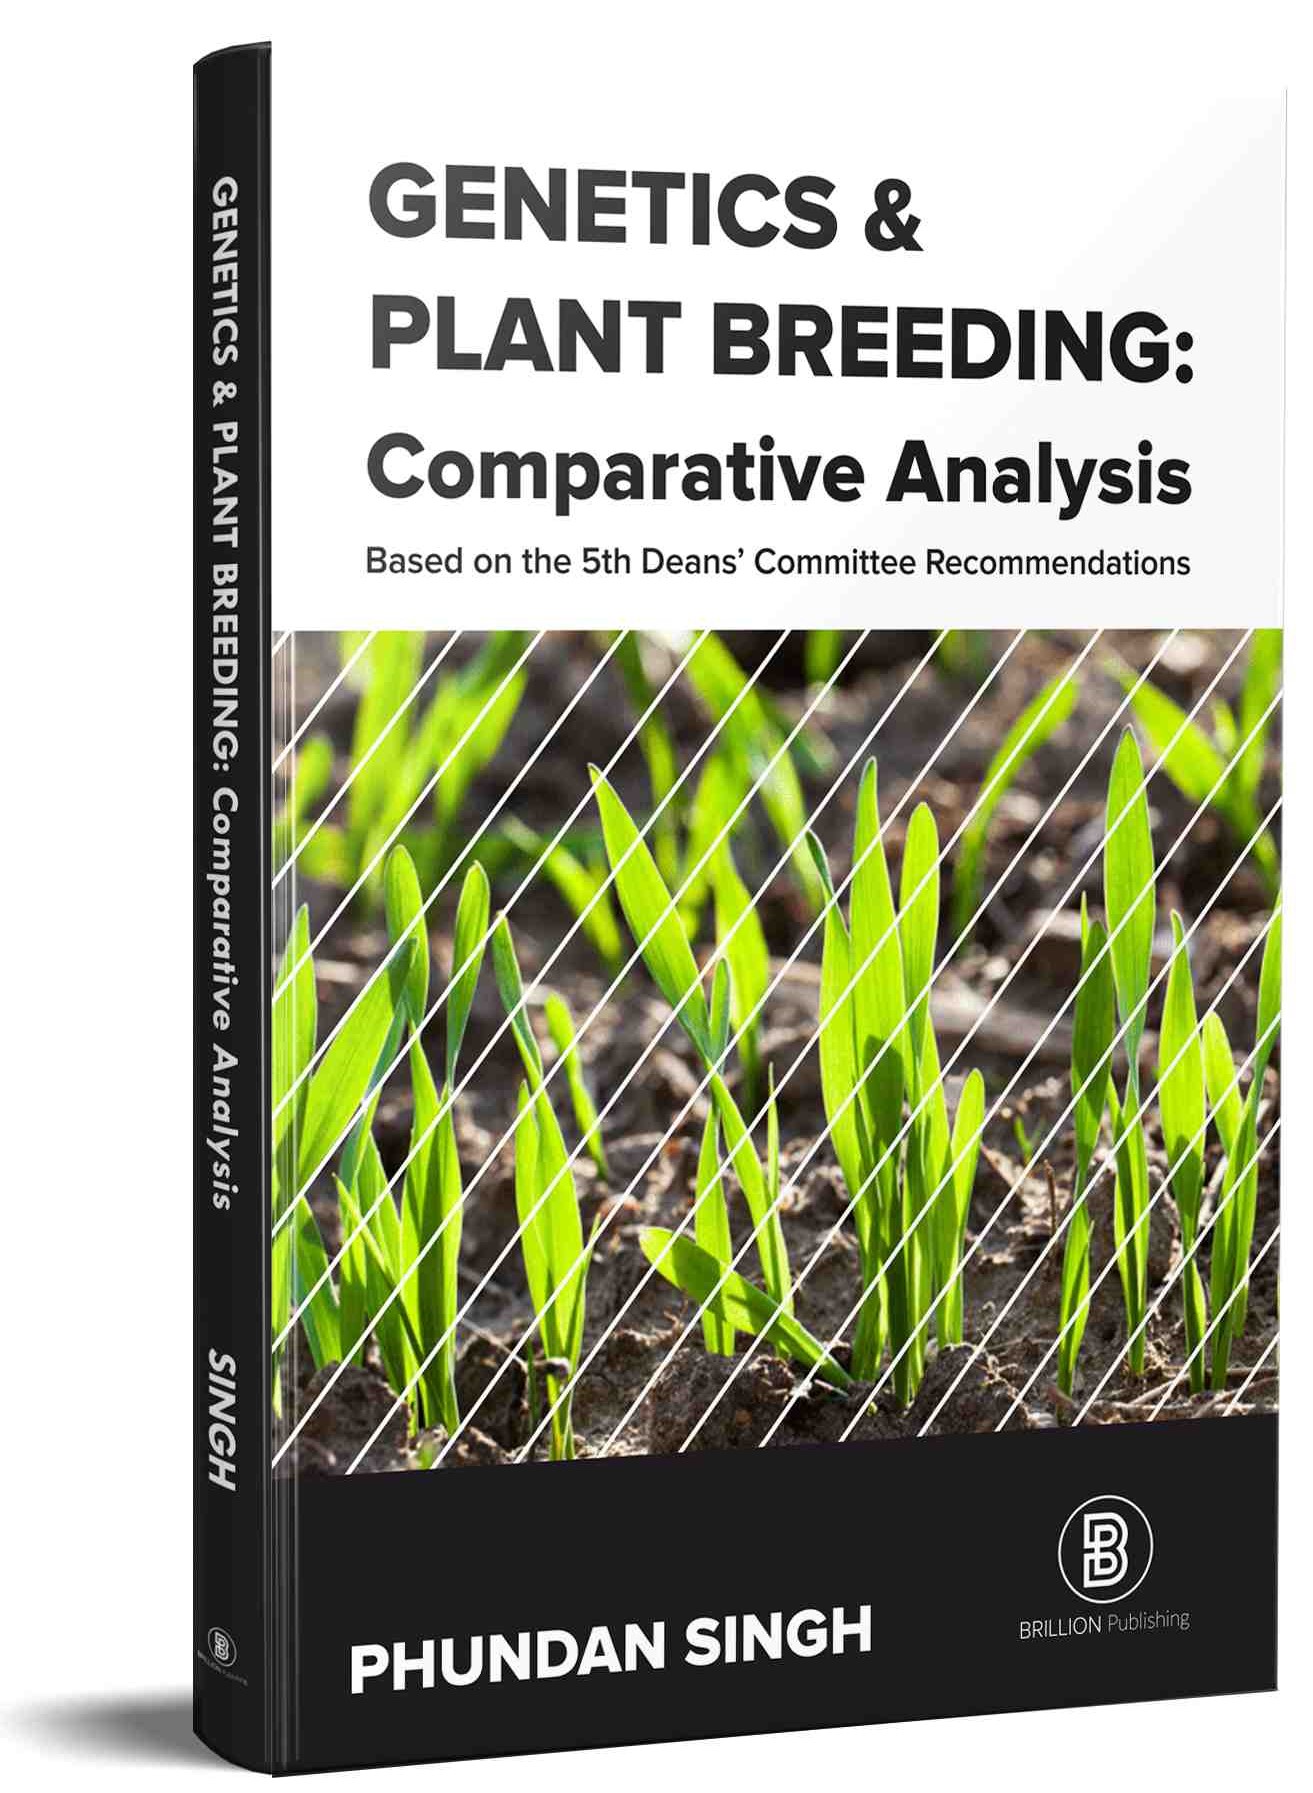 Statistical And Biometrical Techniques In Plant Breeding By Jawahar R. Sharma.pdf